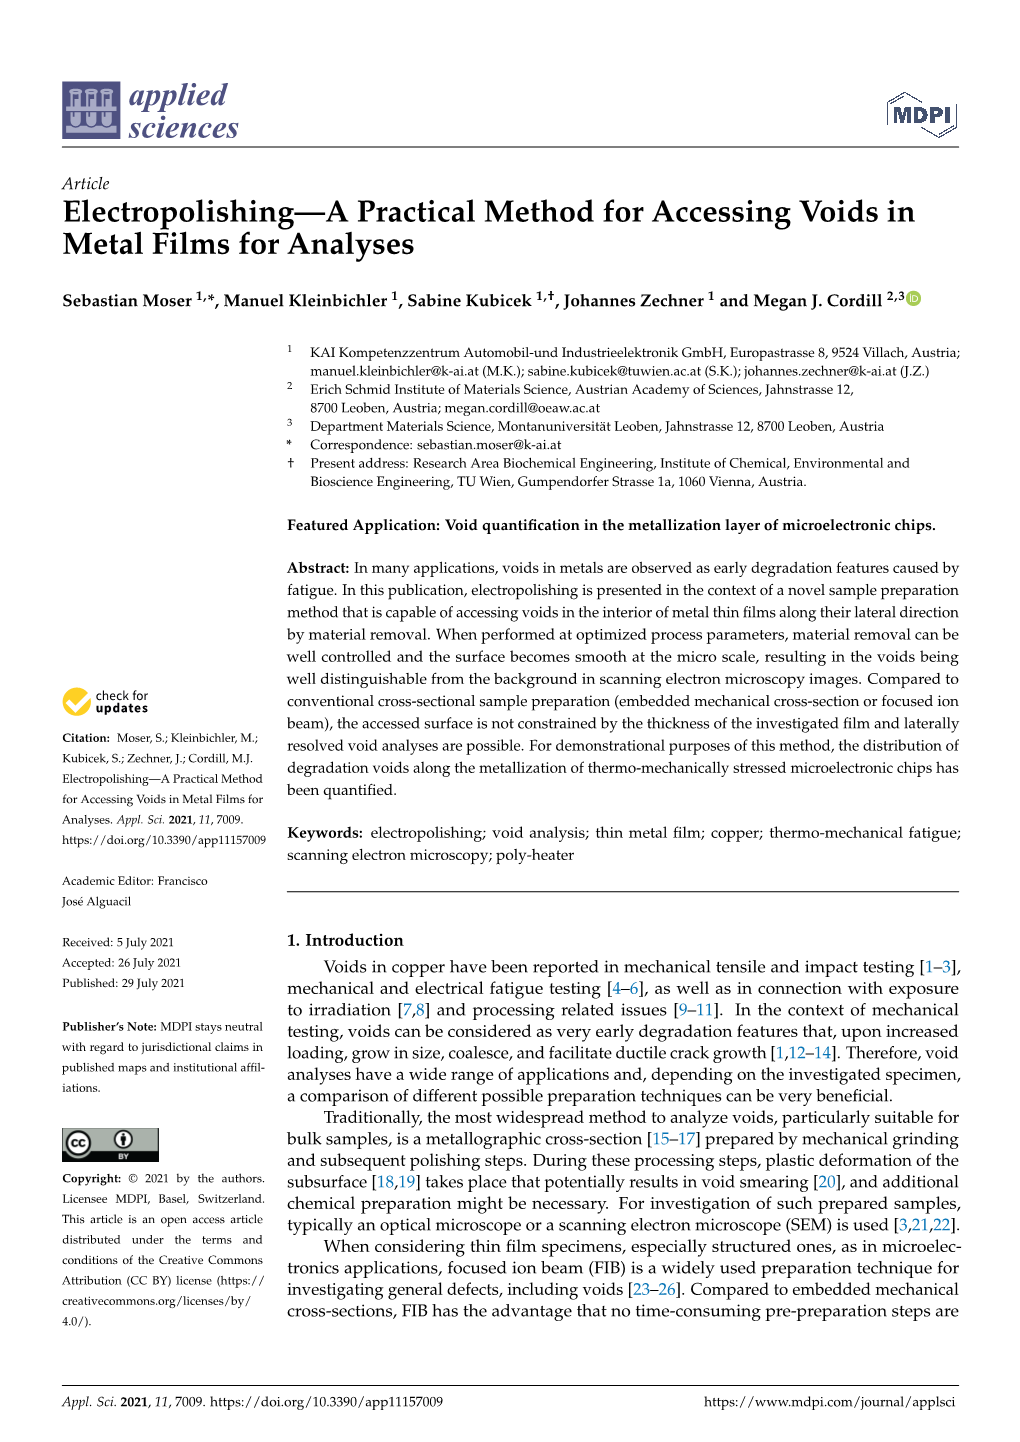 Electropolishing—A Practical Method for Accessing Voids in Metal Films for Analyses